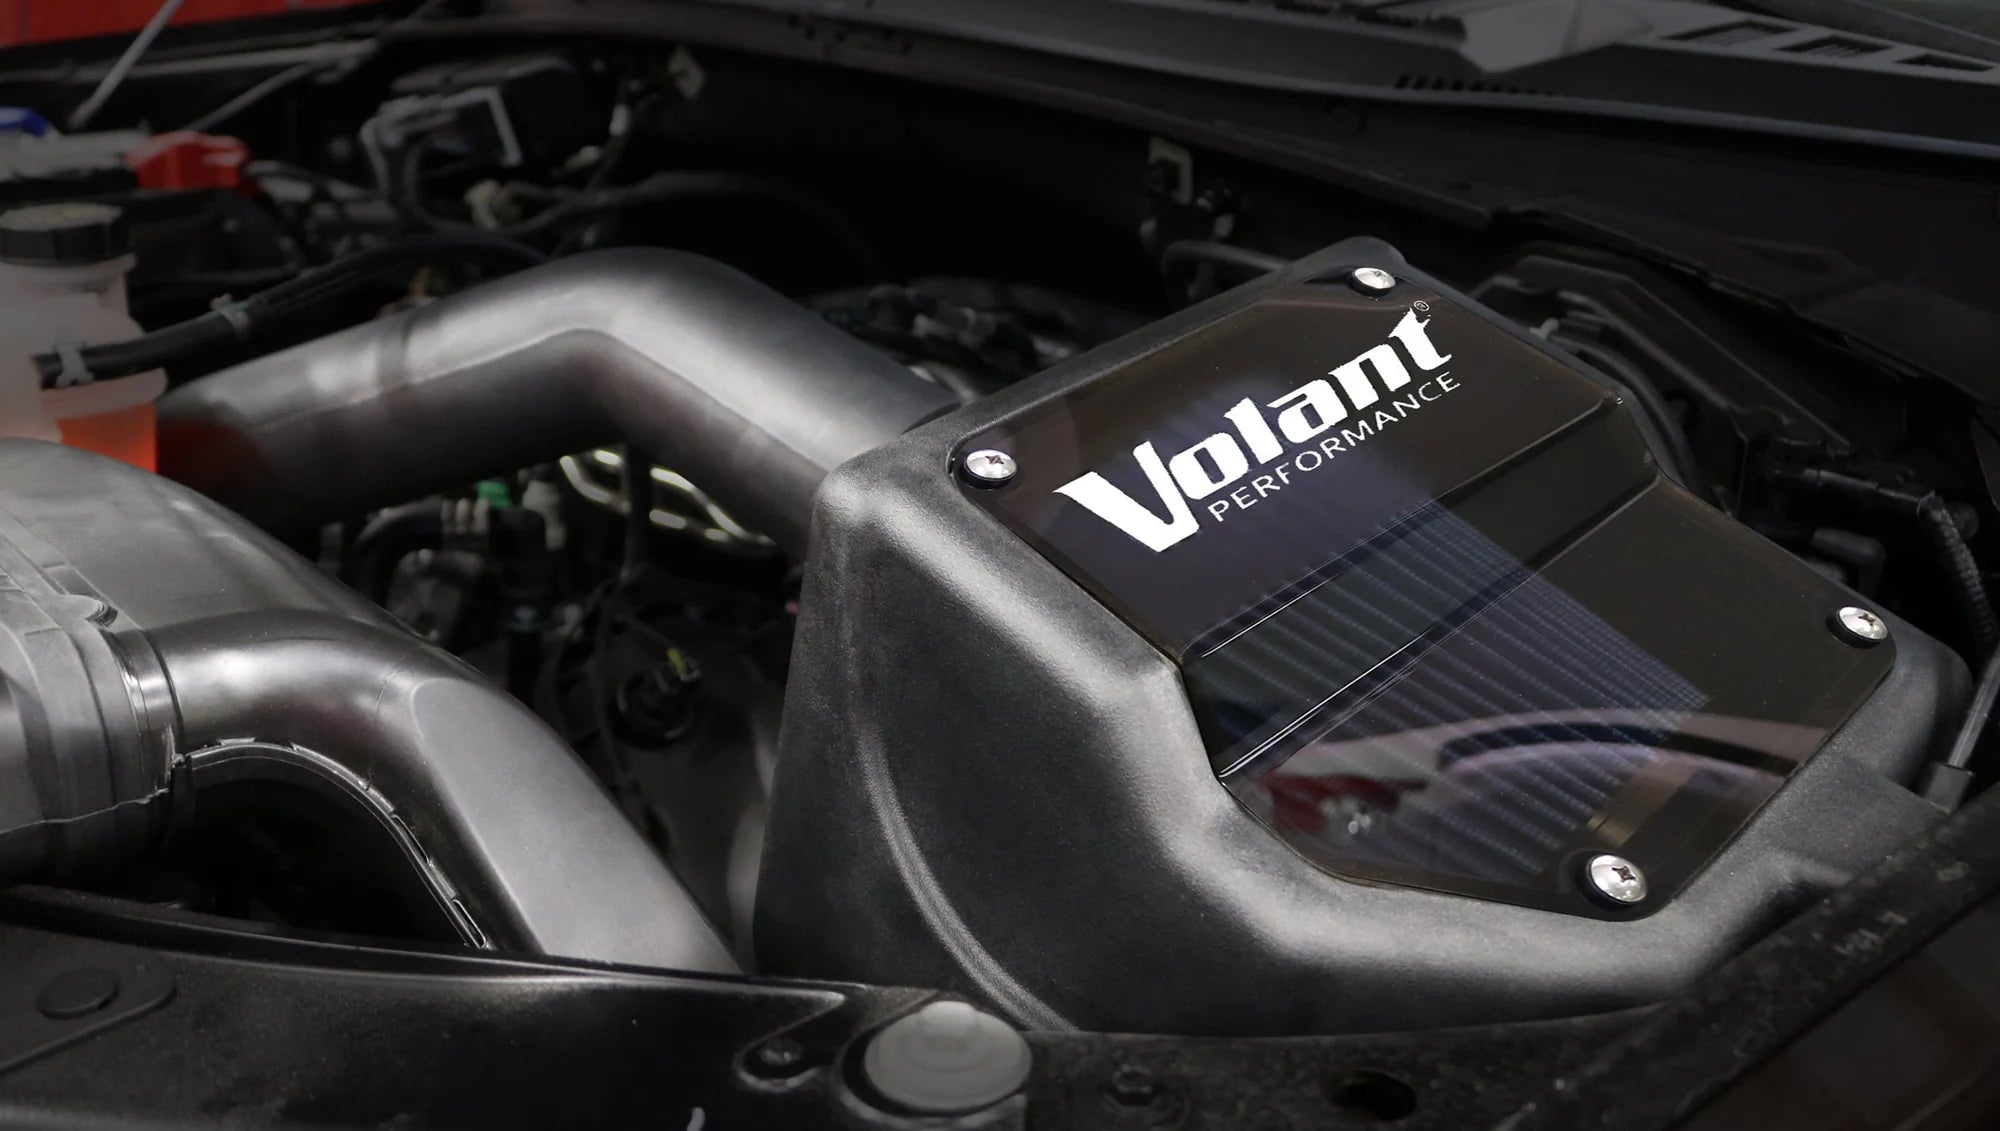 Volant Closed Box Air Intake (Powercore) For 2015-2020 Ford F-150 5.0L V8 - 199506